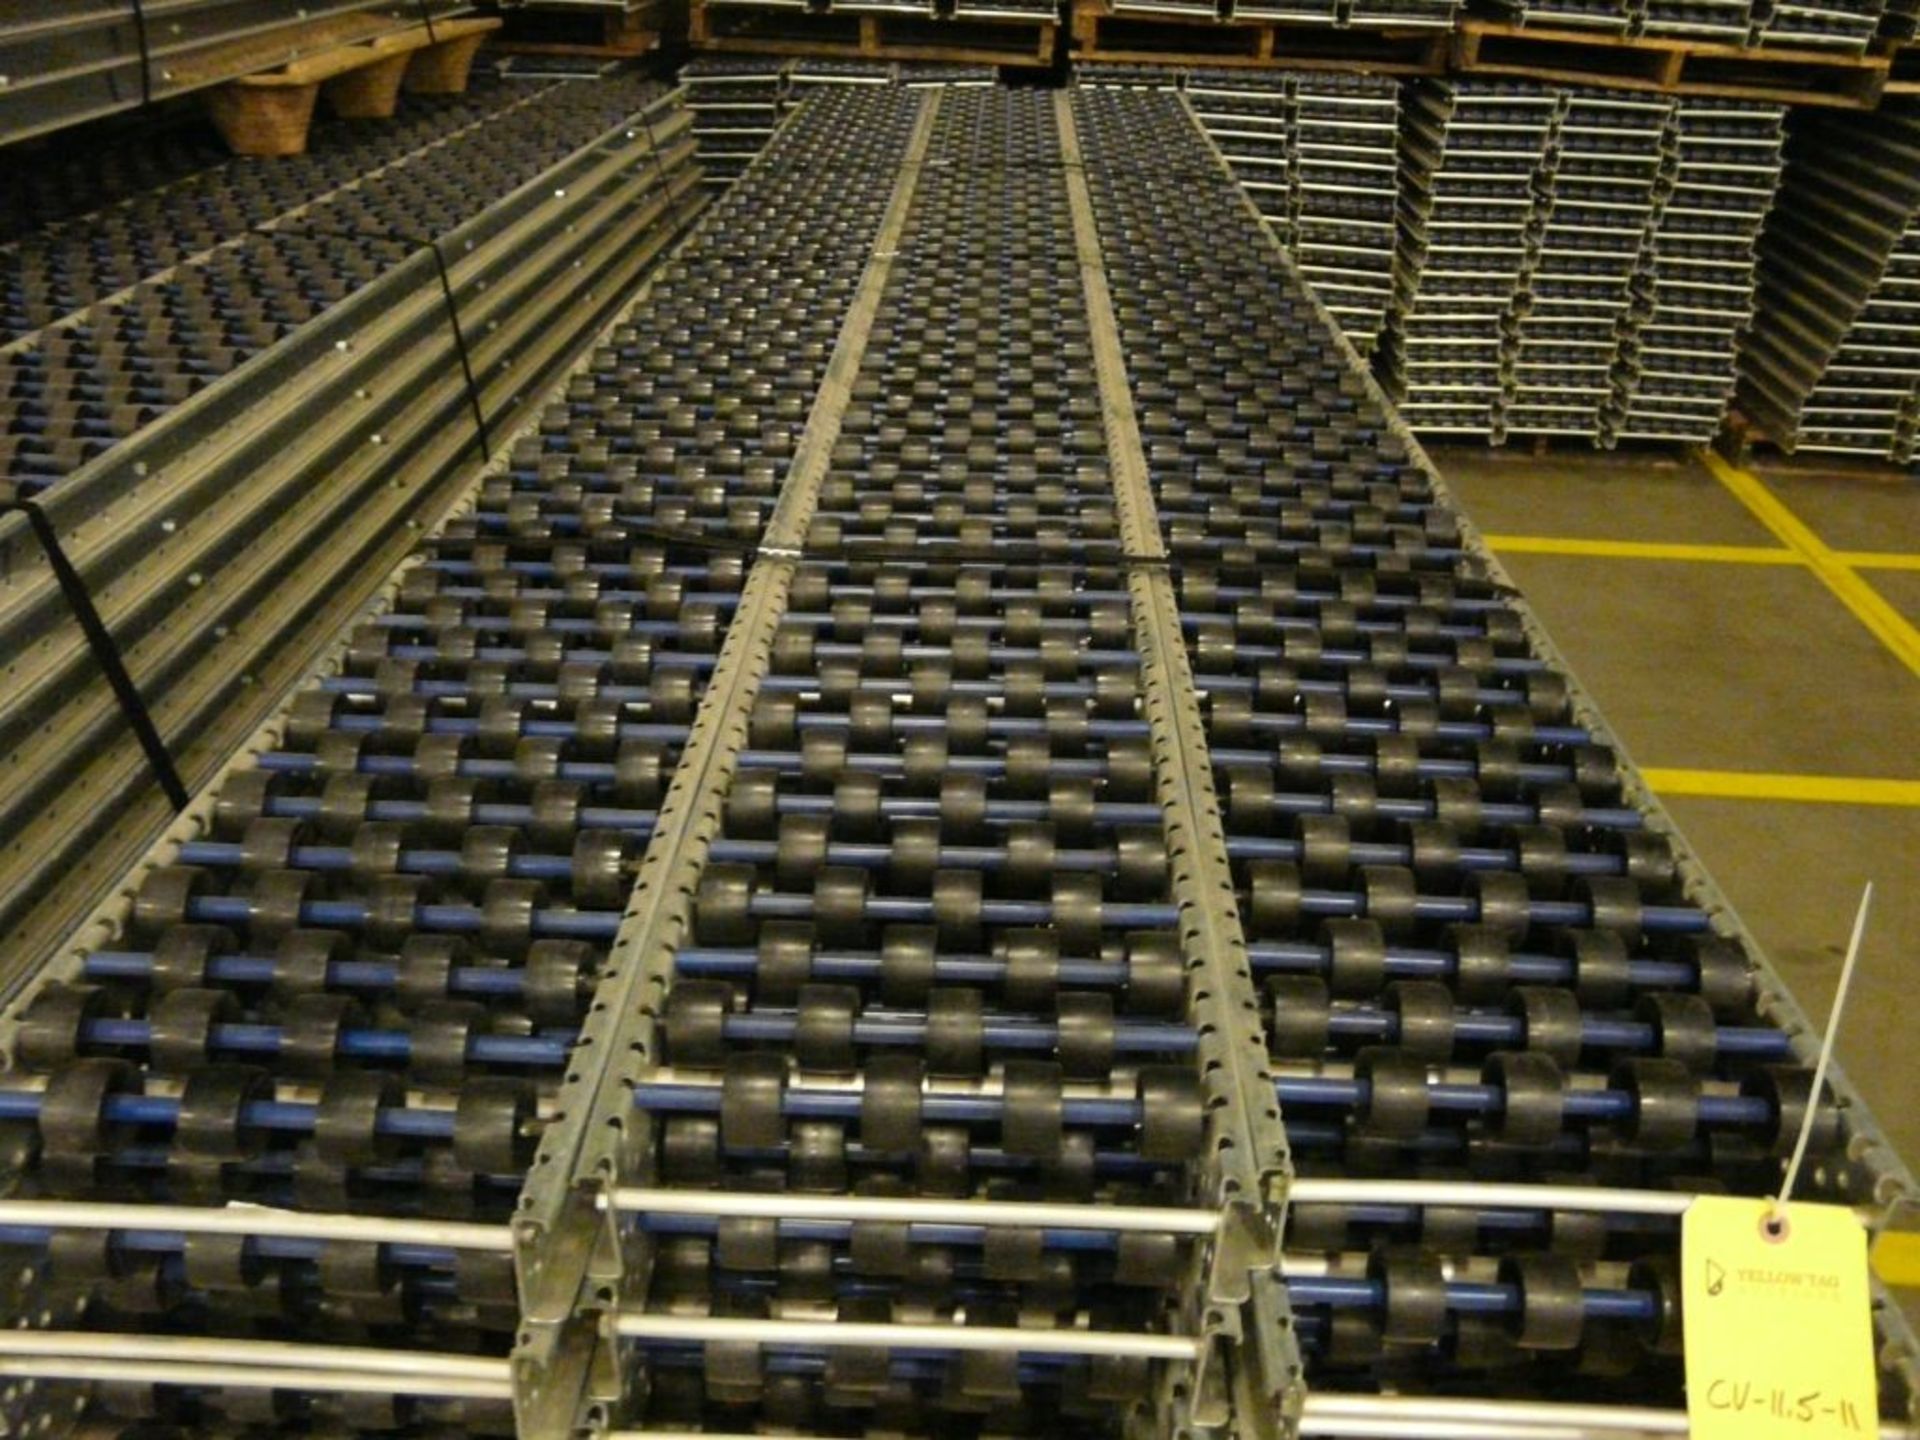 Lot of (90) SpanTrack Wheelbed Carton Flow Conveyors - 11.5'L x 11"W; Tag: 223554 - $30 Lot - Image 3 of 4